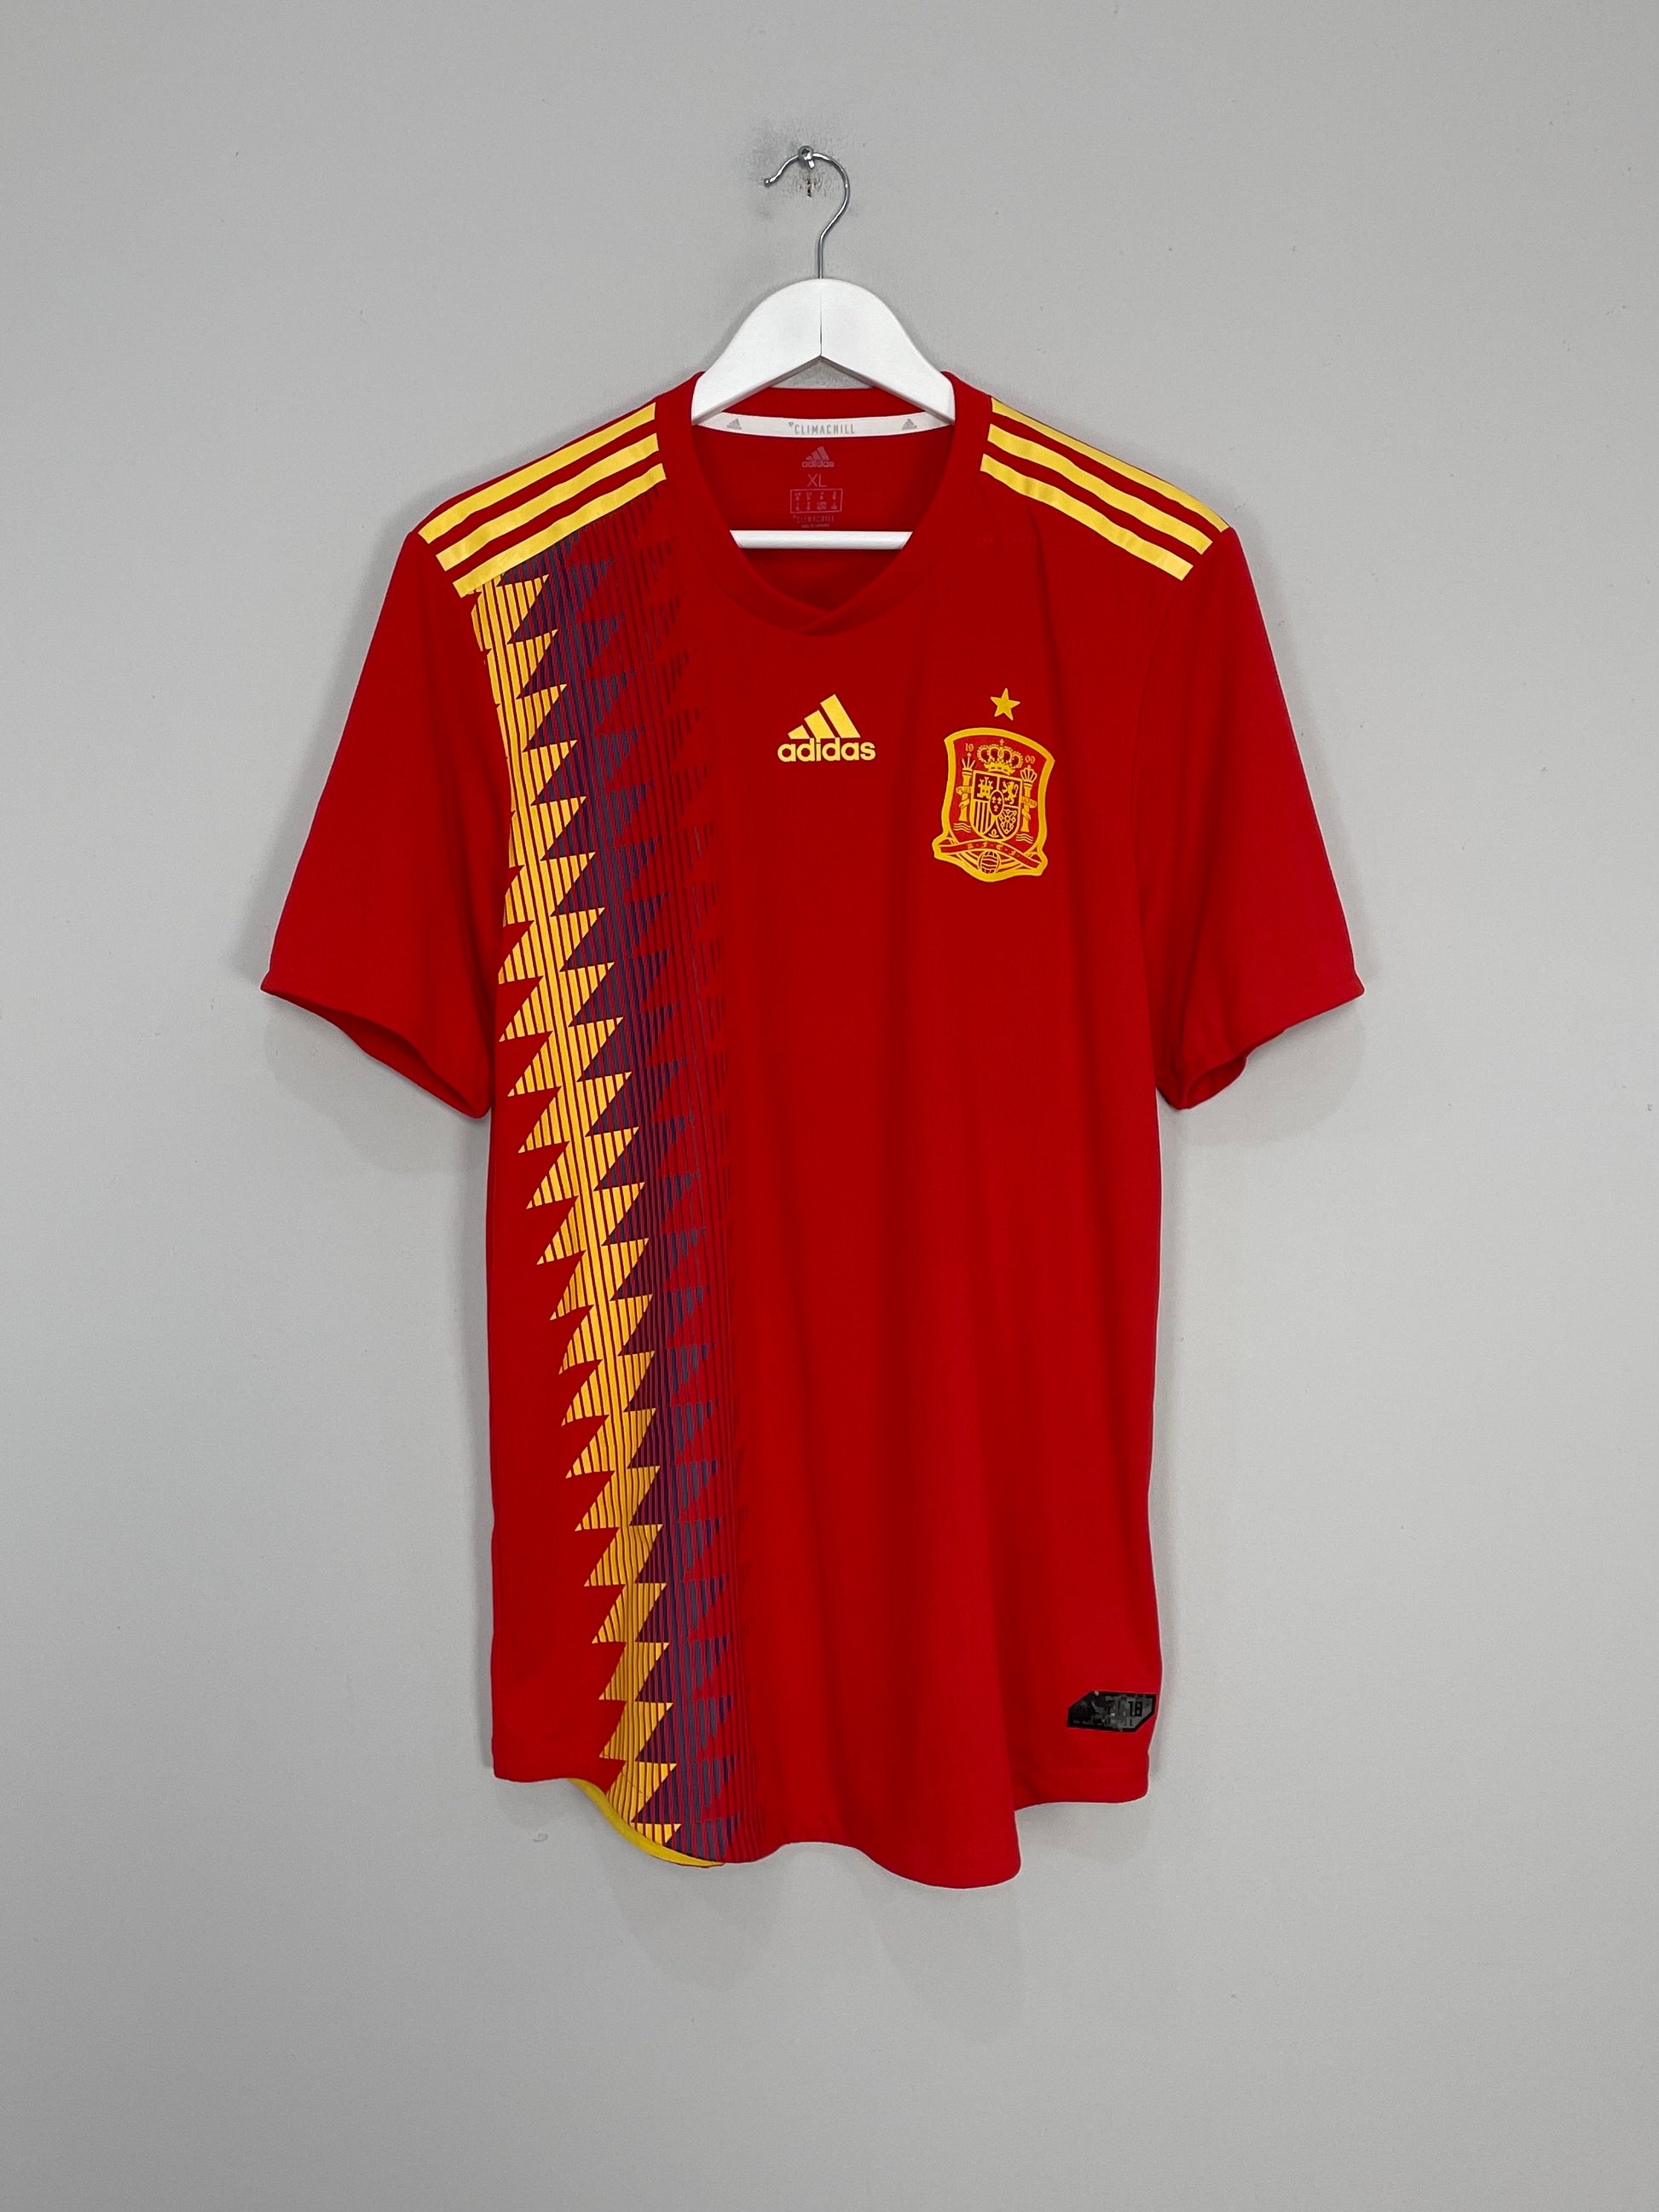 Image of the Spain shirt from the 2018/19 season